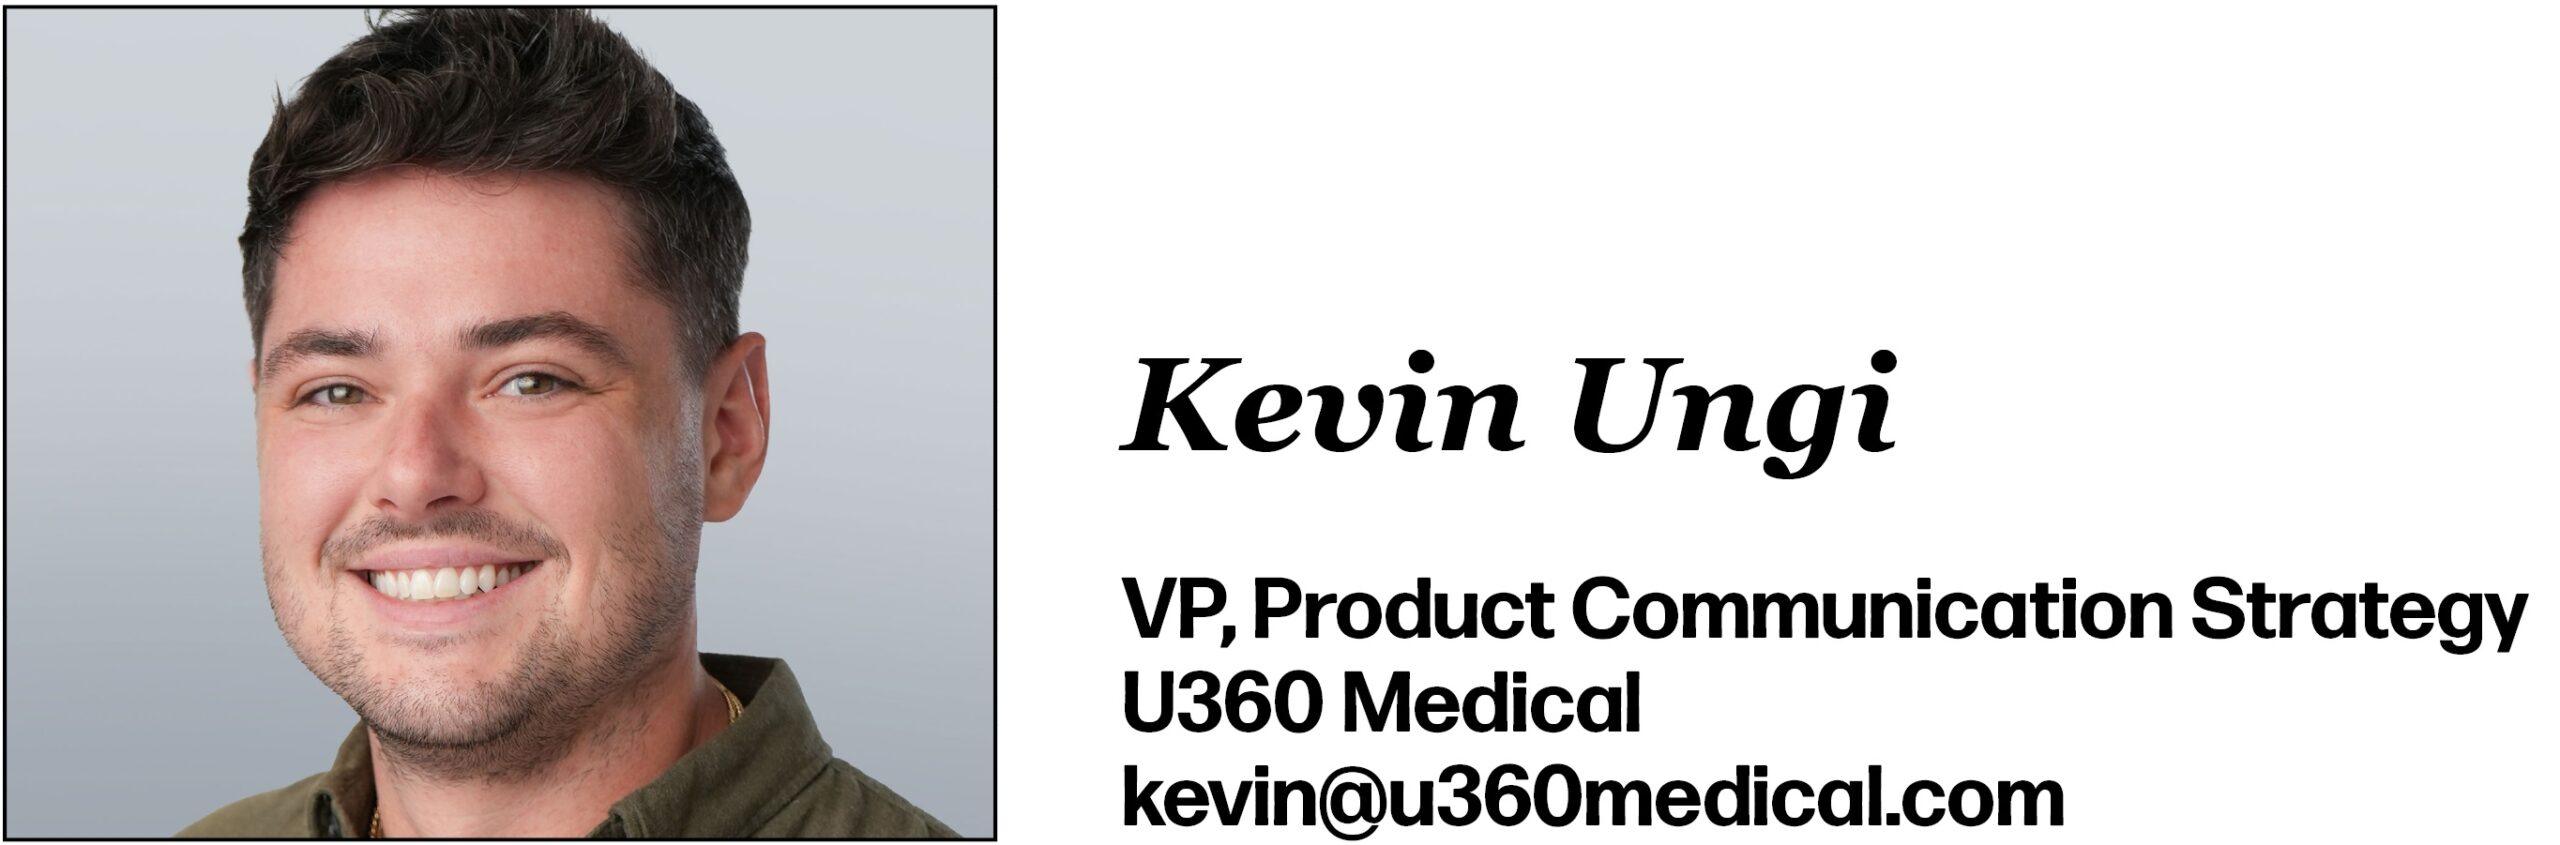 Kevin Ungi is Vice President, Product Communication Strategy at U360 Medical. His email is kevin@u360medical.com.